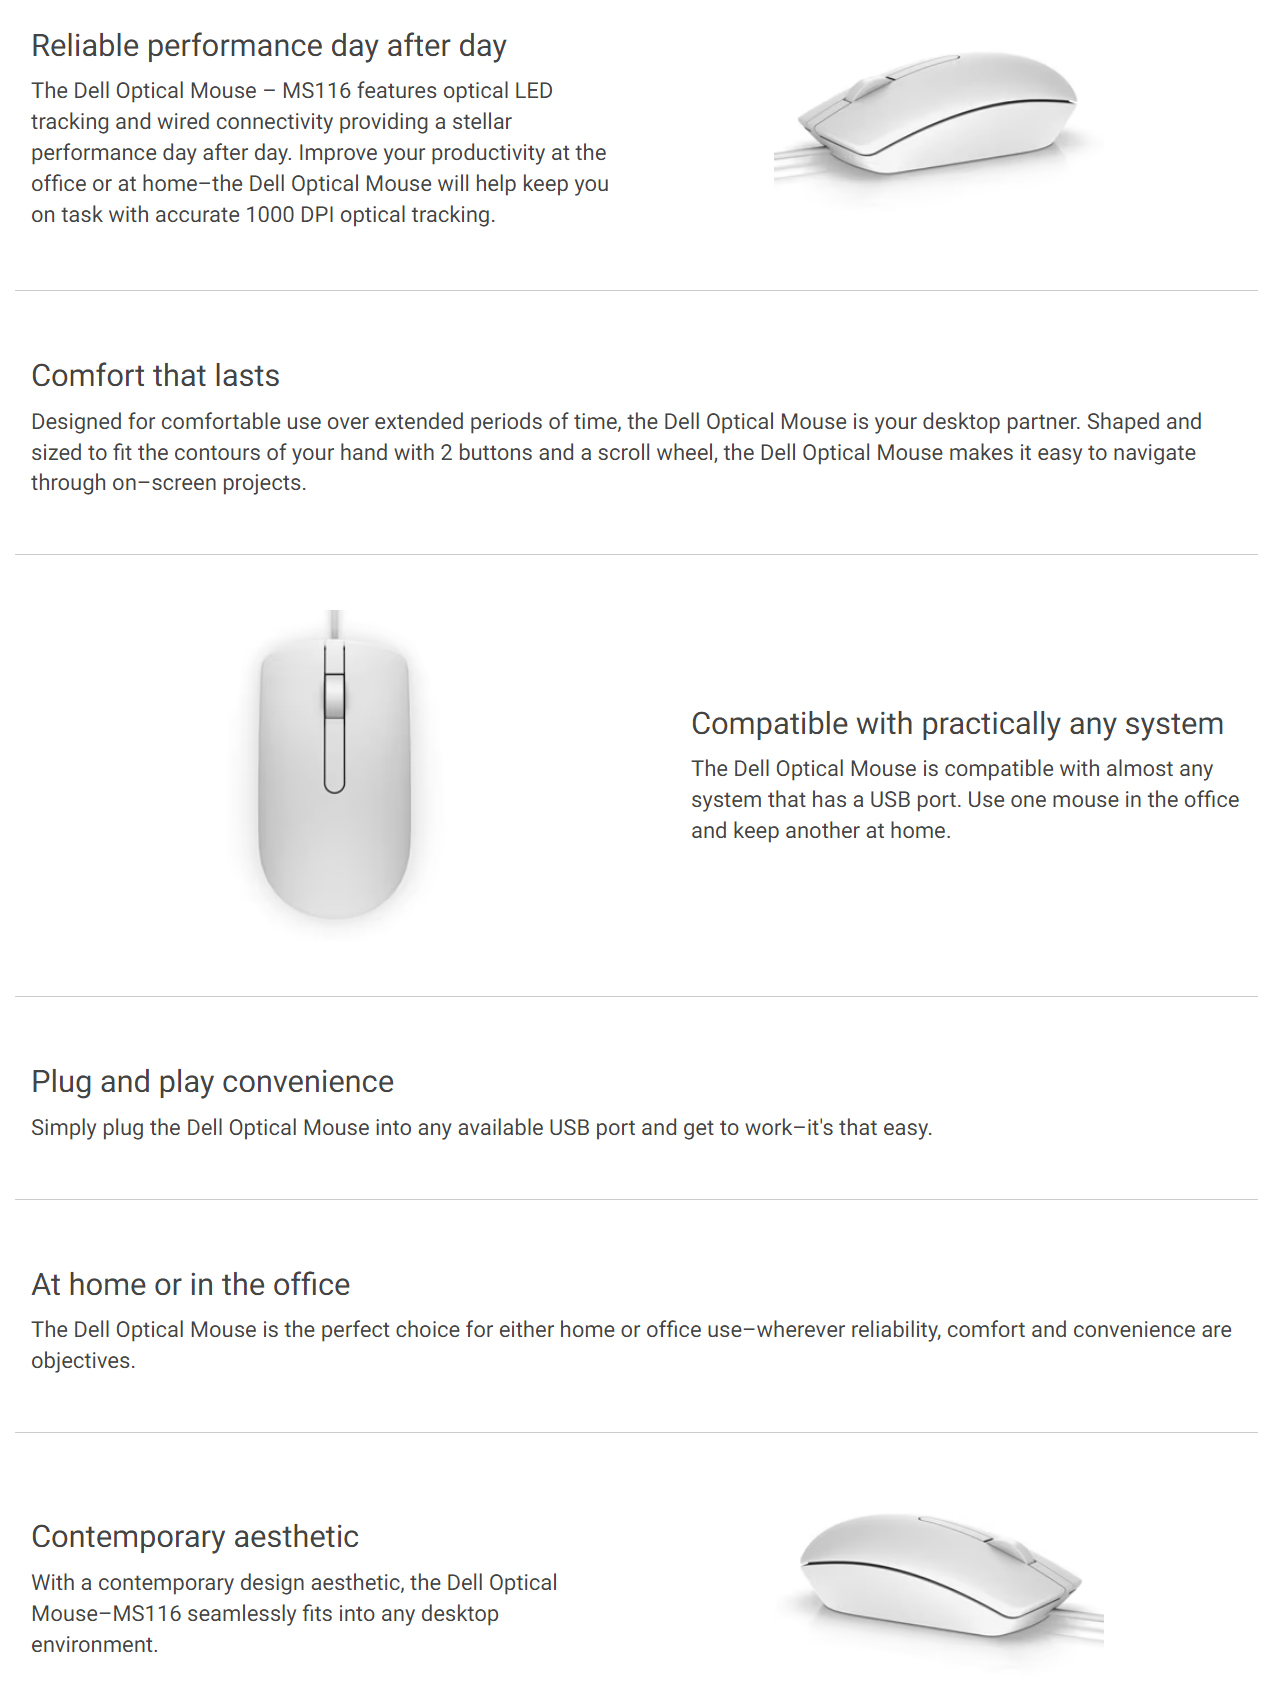 Dell-MS116-Wired-Optical-Mouse-White-1